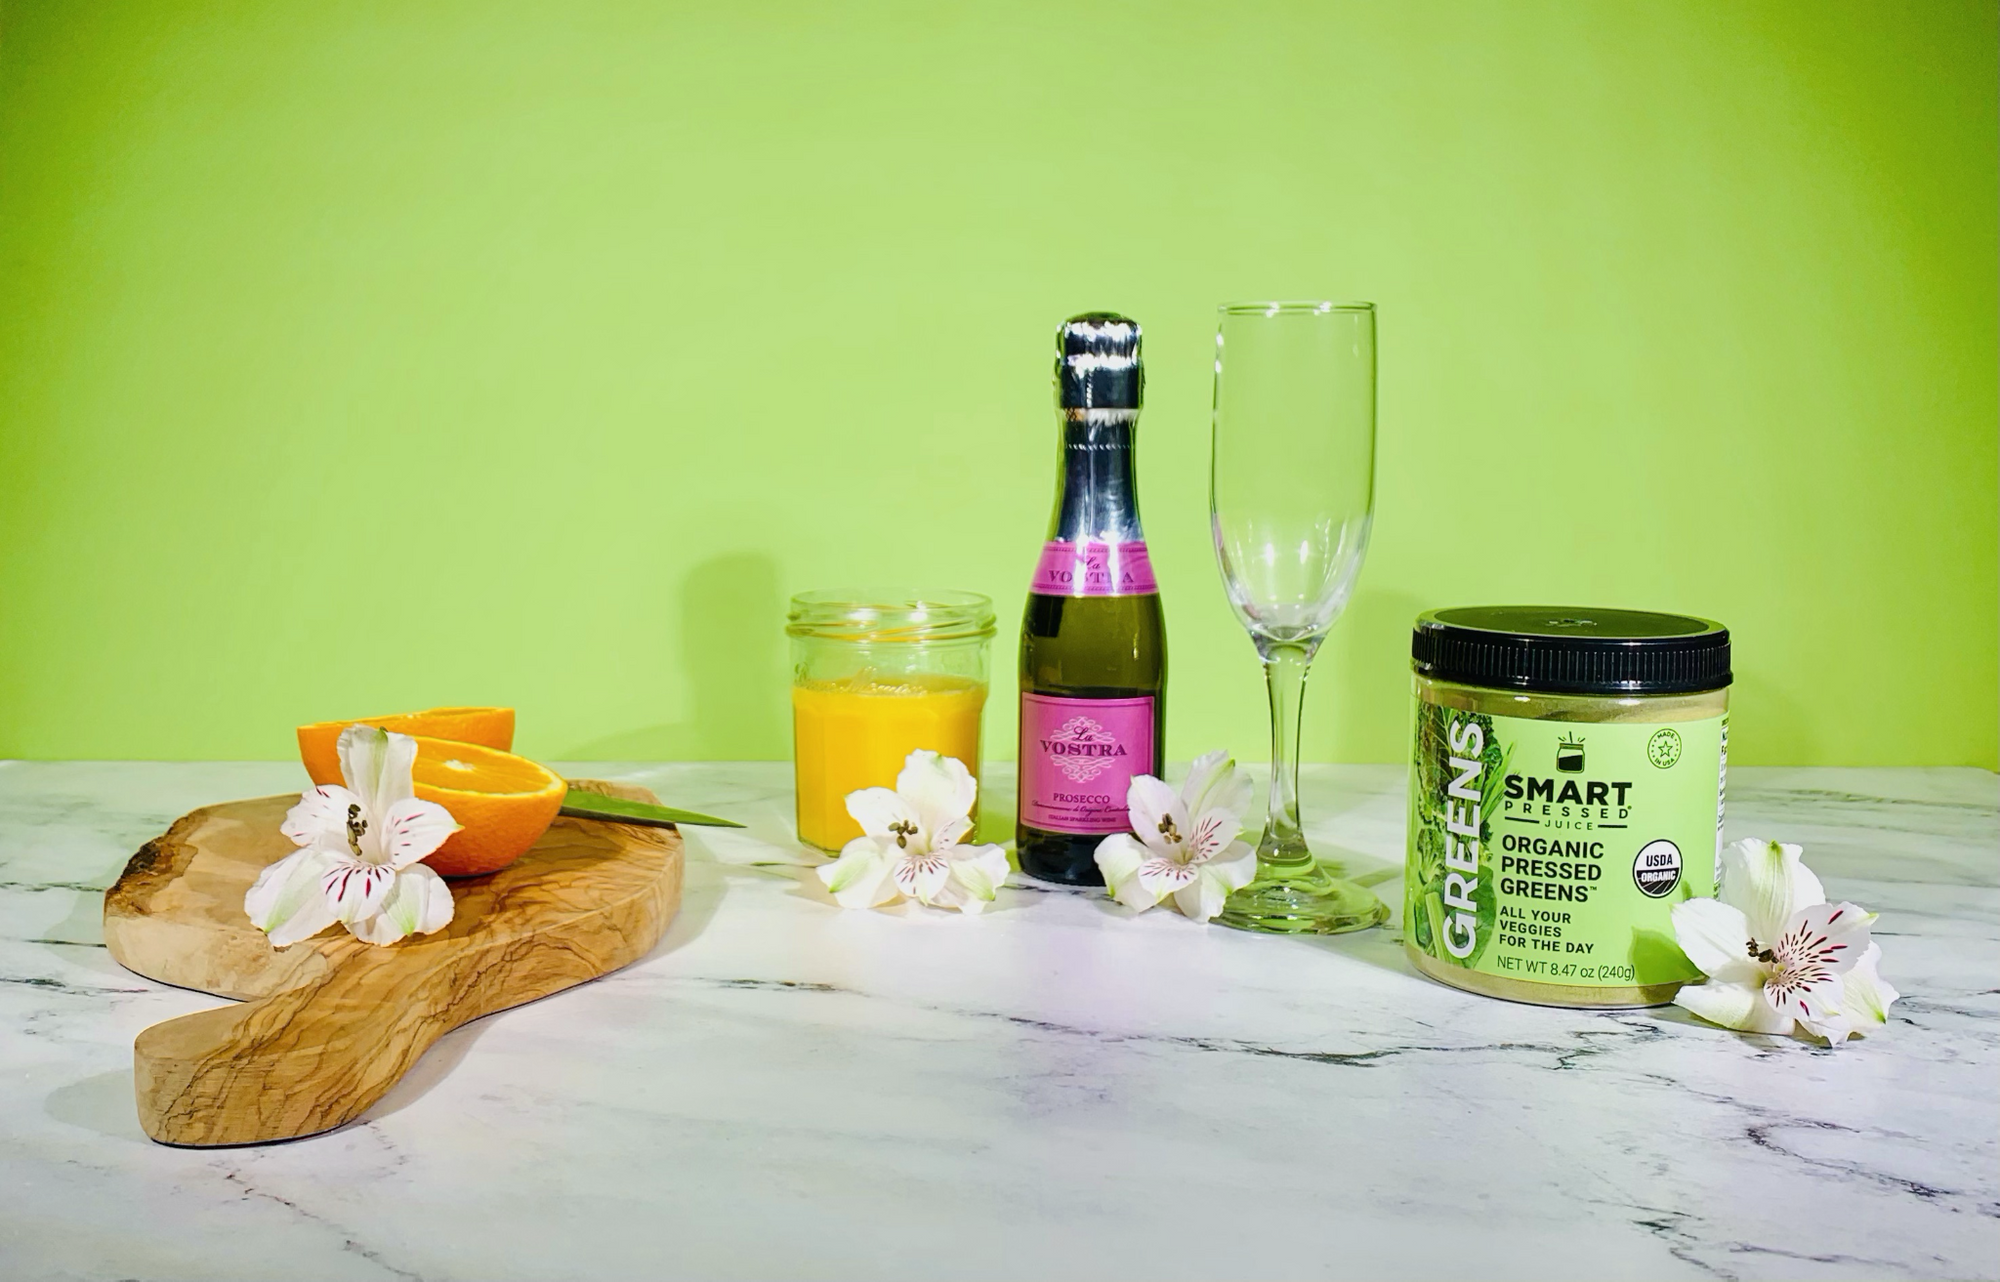 a cutting board with 2 slices of oranges and white orchid beside a glass of orange juice beside a bottle of mimosa, a champagne glass and a jar of Organic Pressed Greens surrounded by white orchid flower on a marble top against a green wall.